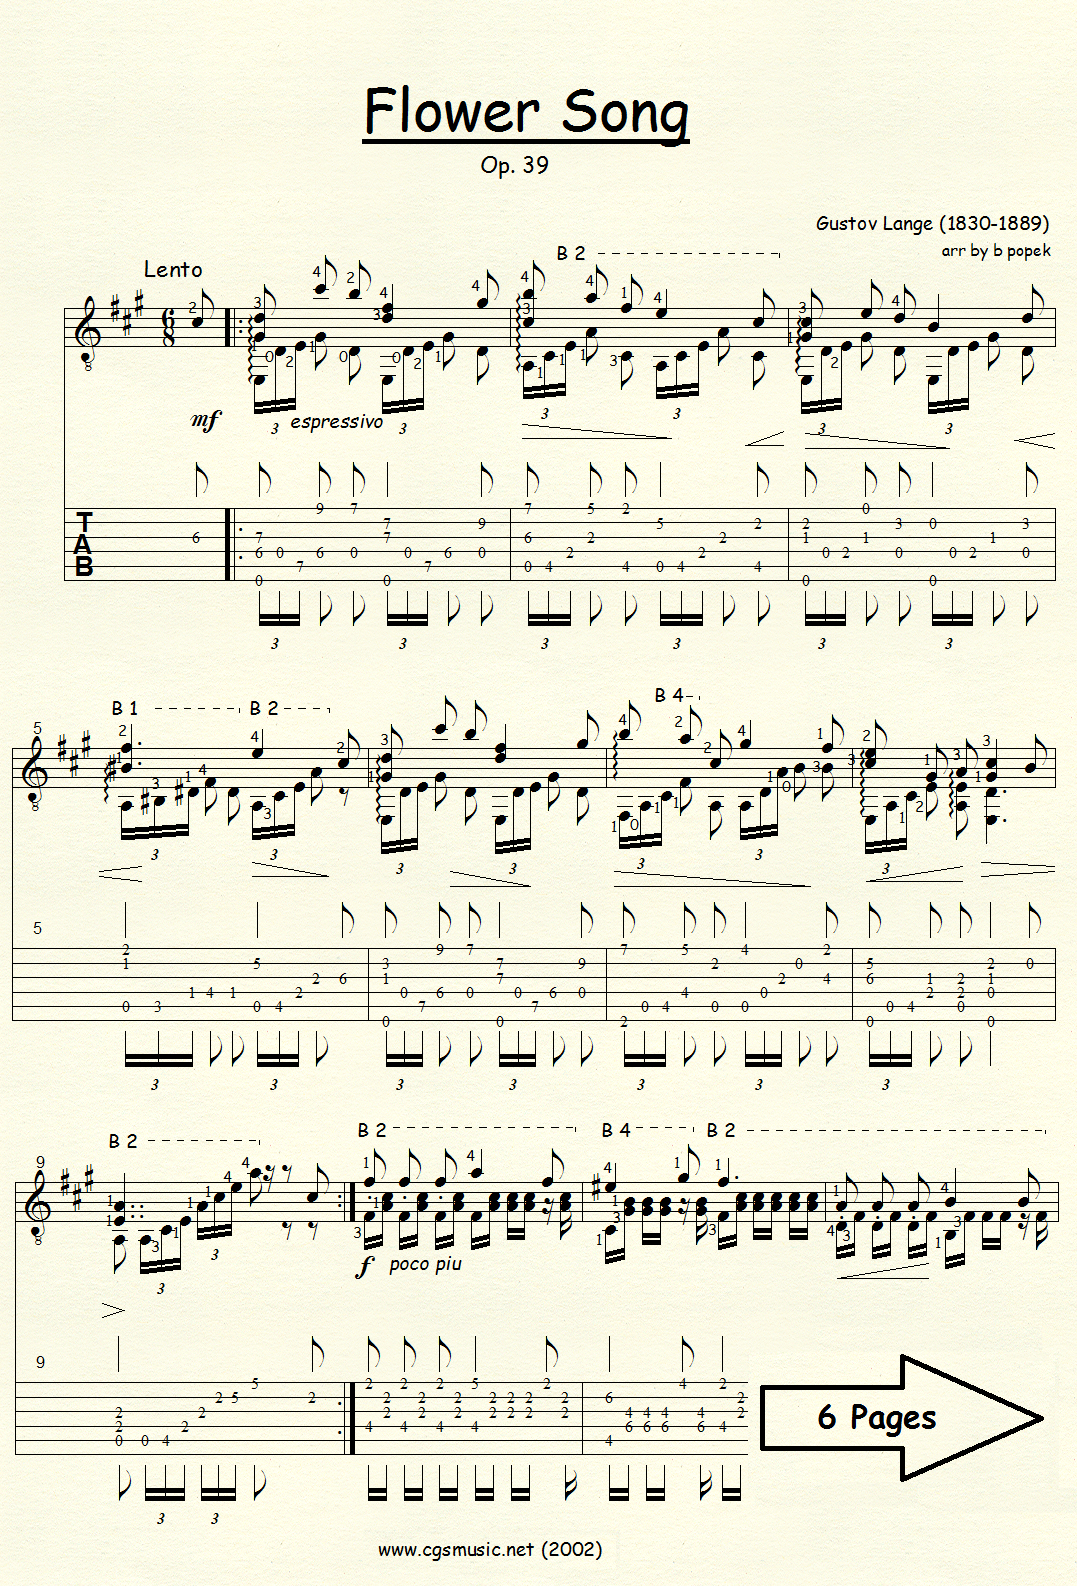 Flower Song (Lange) for Classical Guitar in Tablature